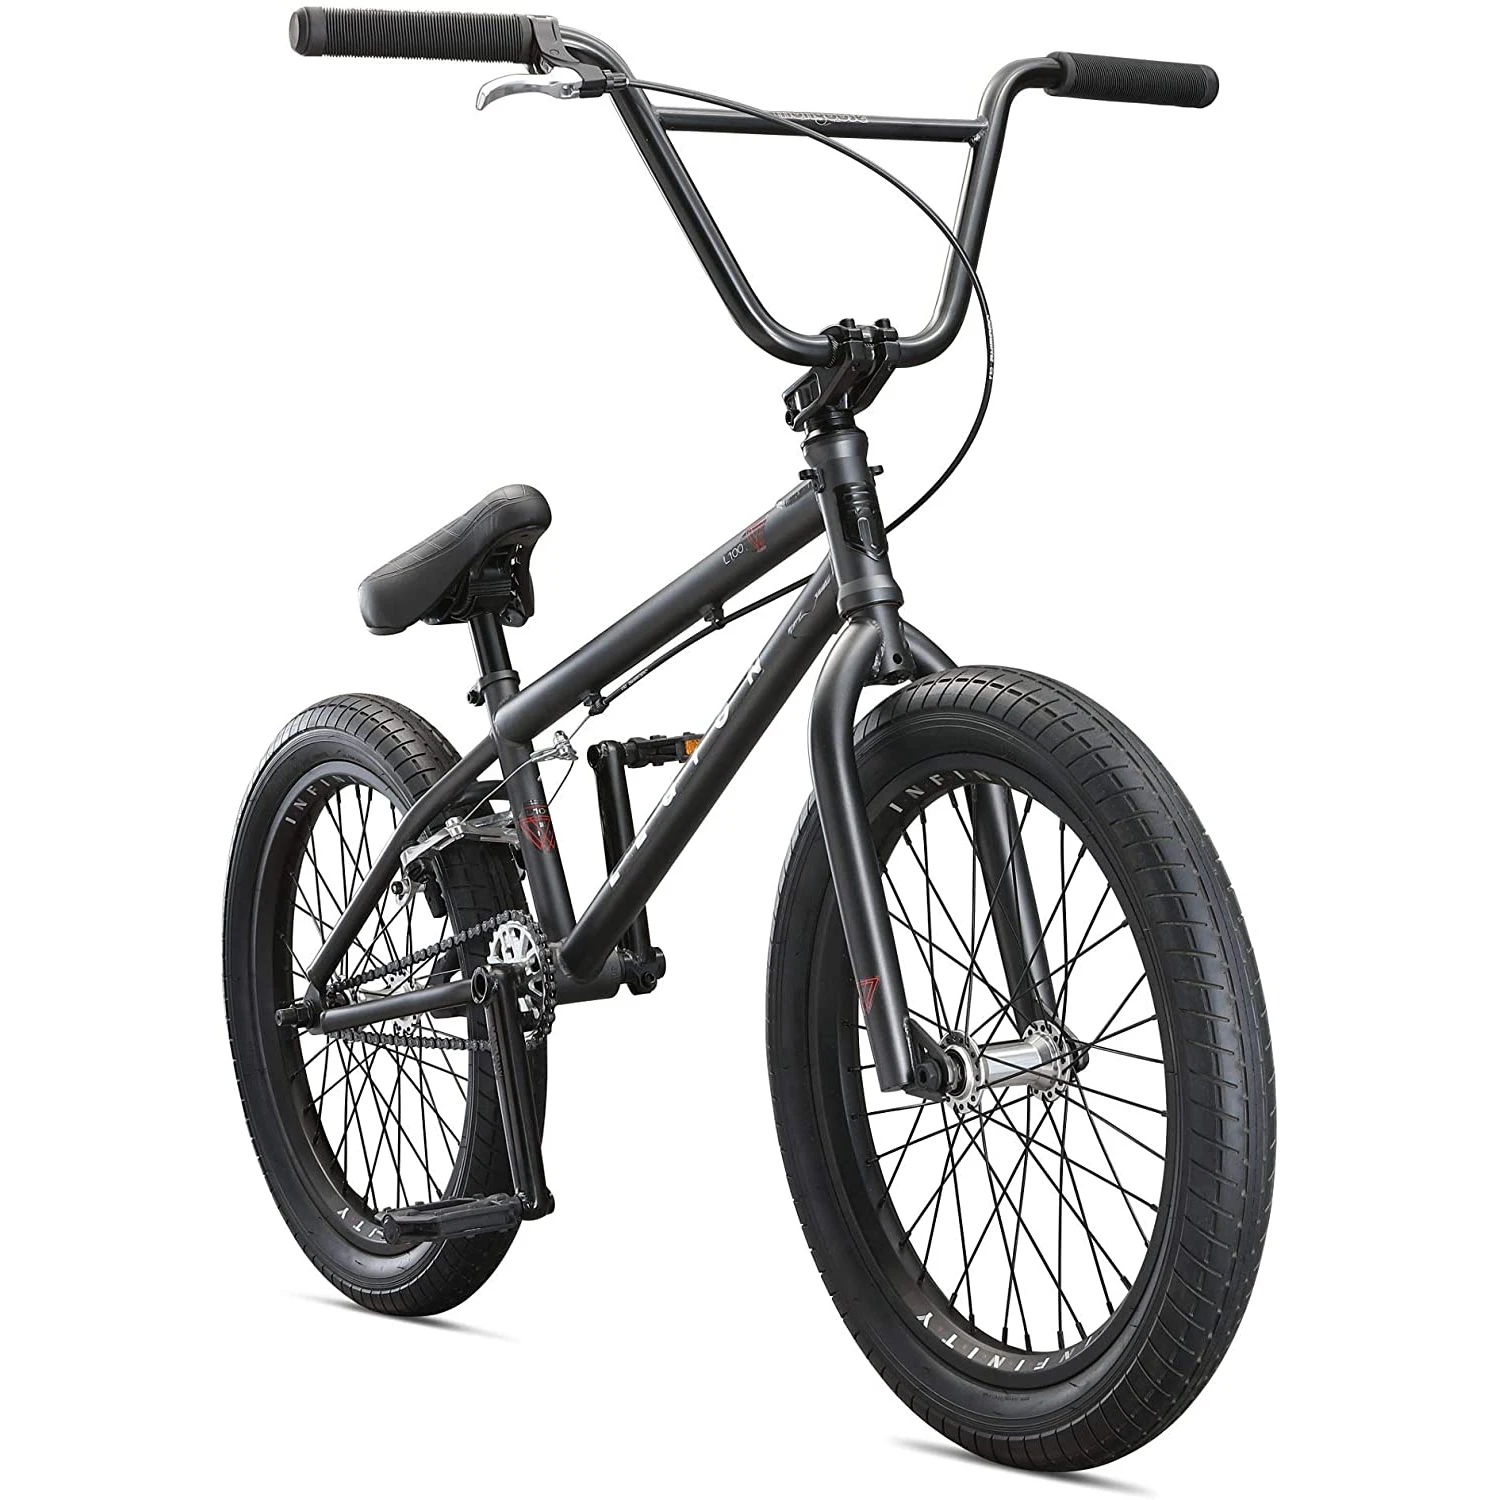 

16 inch 20 inch 24 inch 26 inch mini race bmx bike cycle bicycle bicycles bisicletas BMX bikes street freestyle cycle for man, Customized